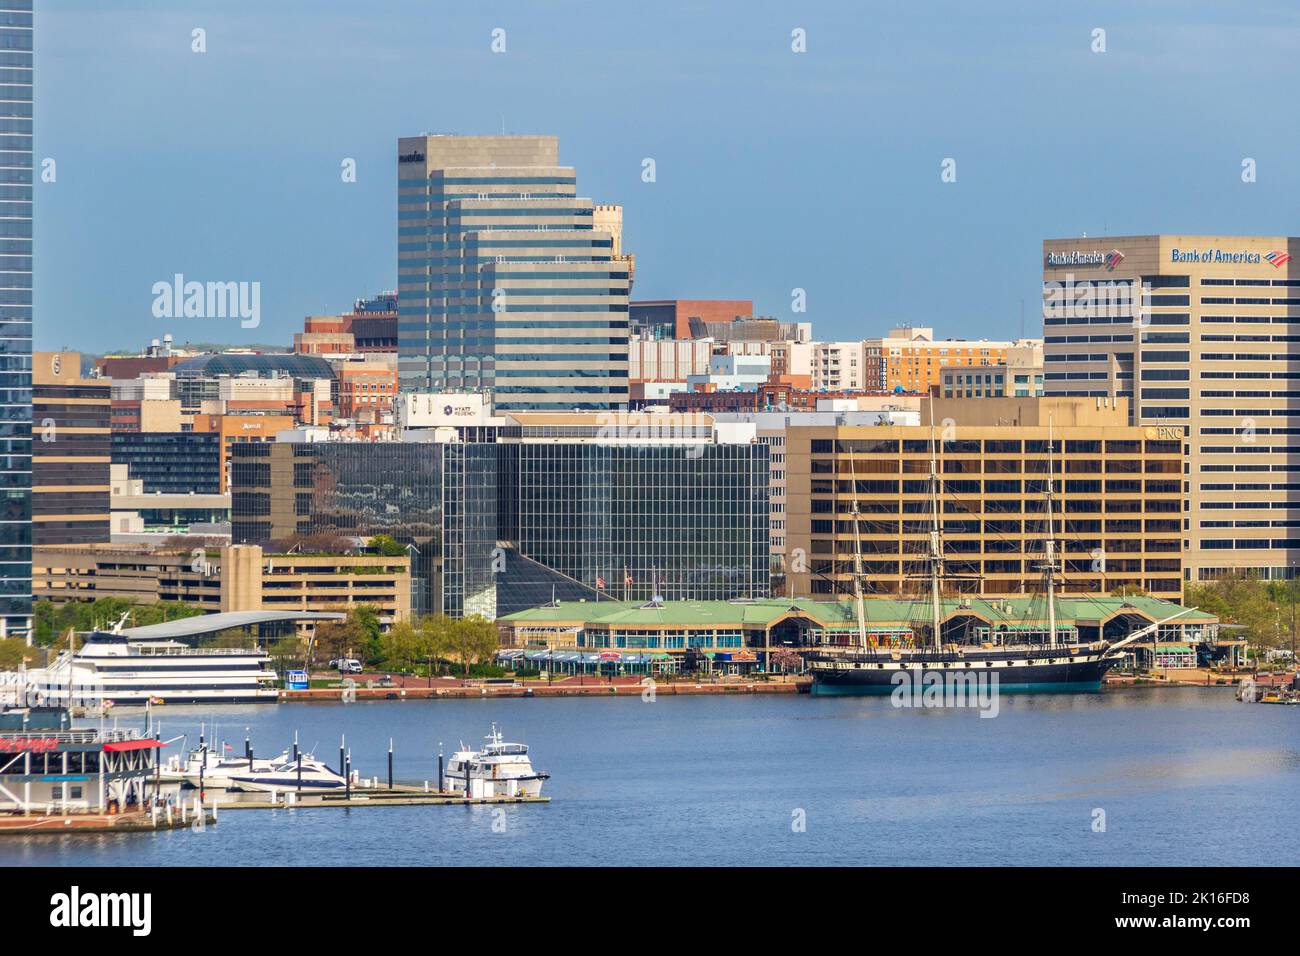 USS Constellation, a sloop-of-war, the last sail-only warship built by the US Navy, in Baltimore Inner Harbor, Baltimore, Maryland. Stock Photo